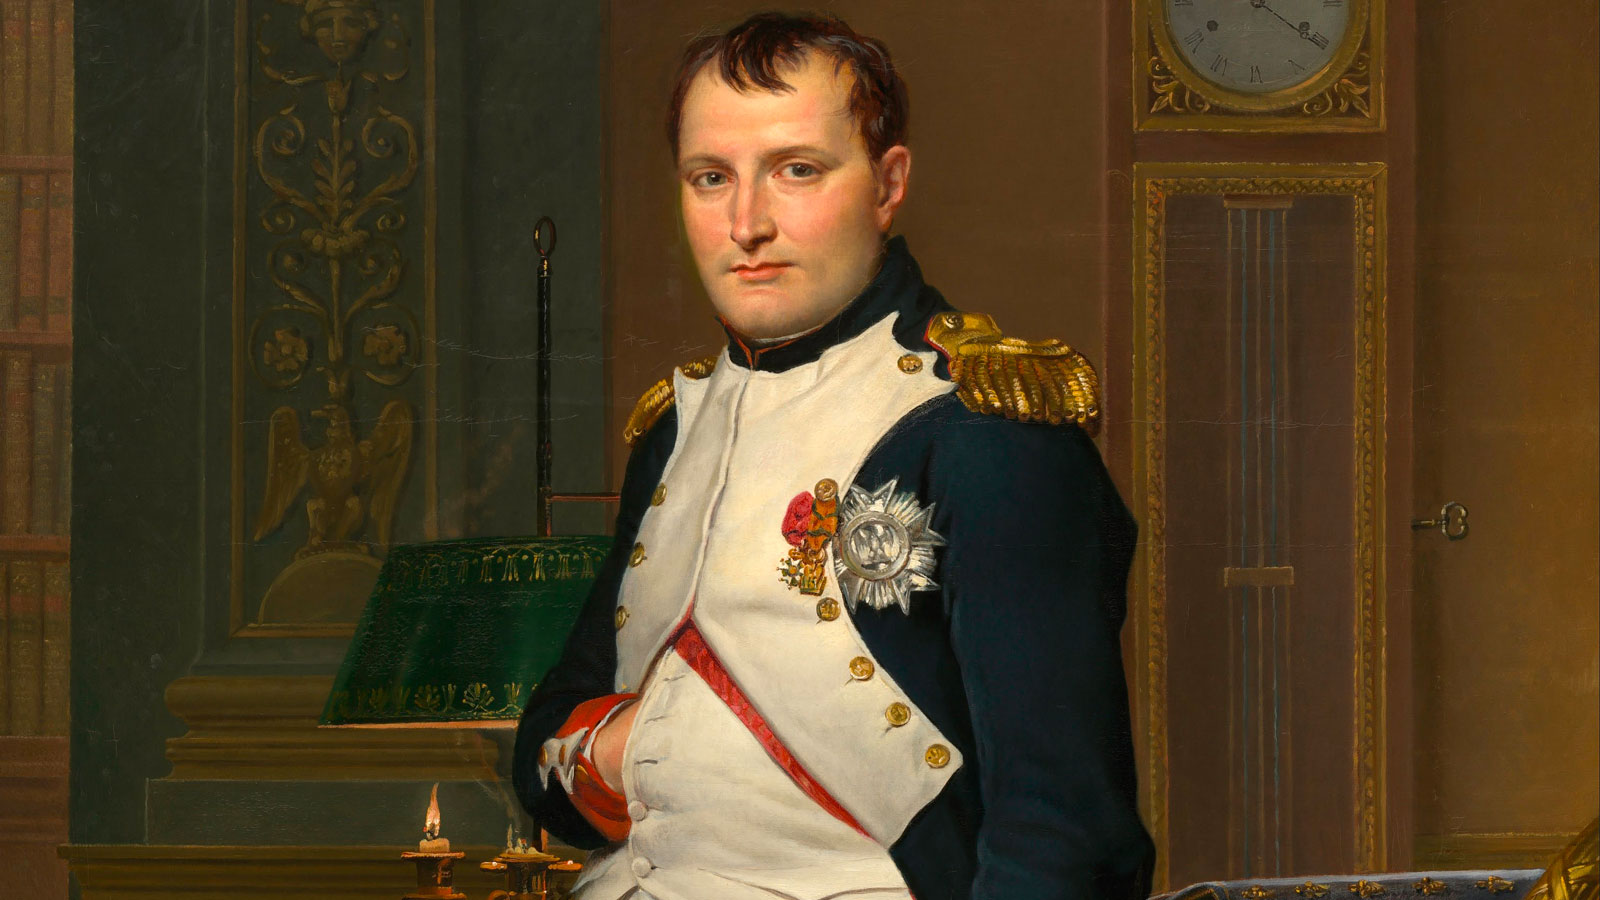 Can You Beat the Average Person at Busting These Common Myths? Napoléon